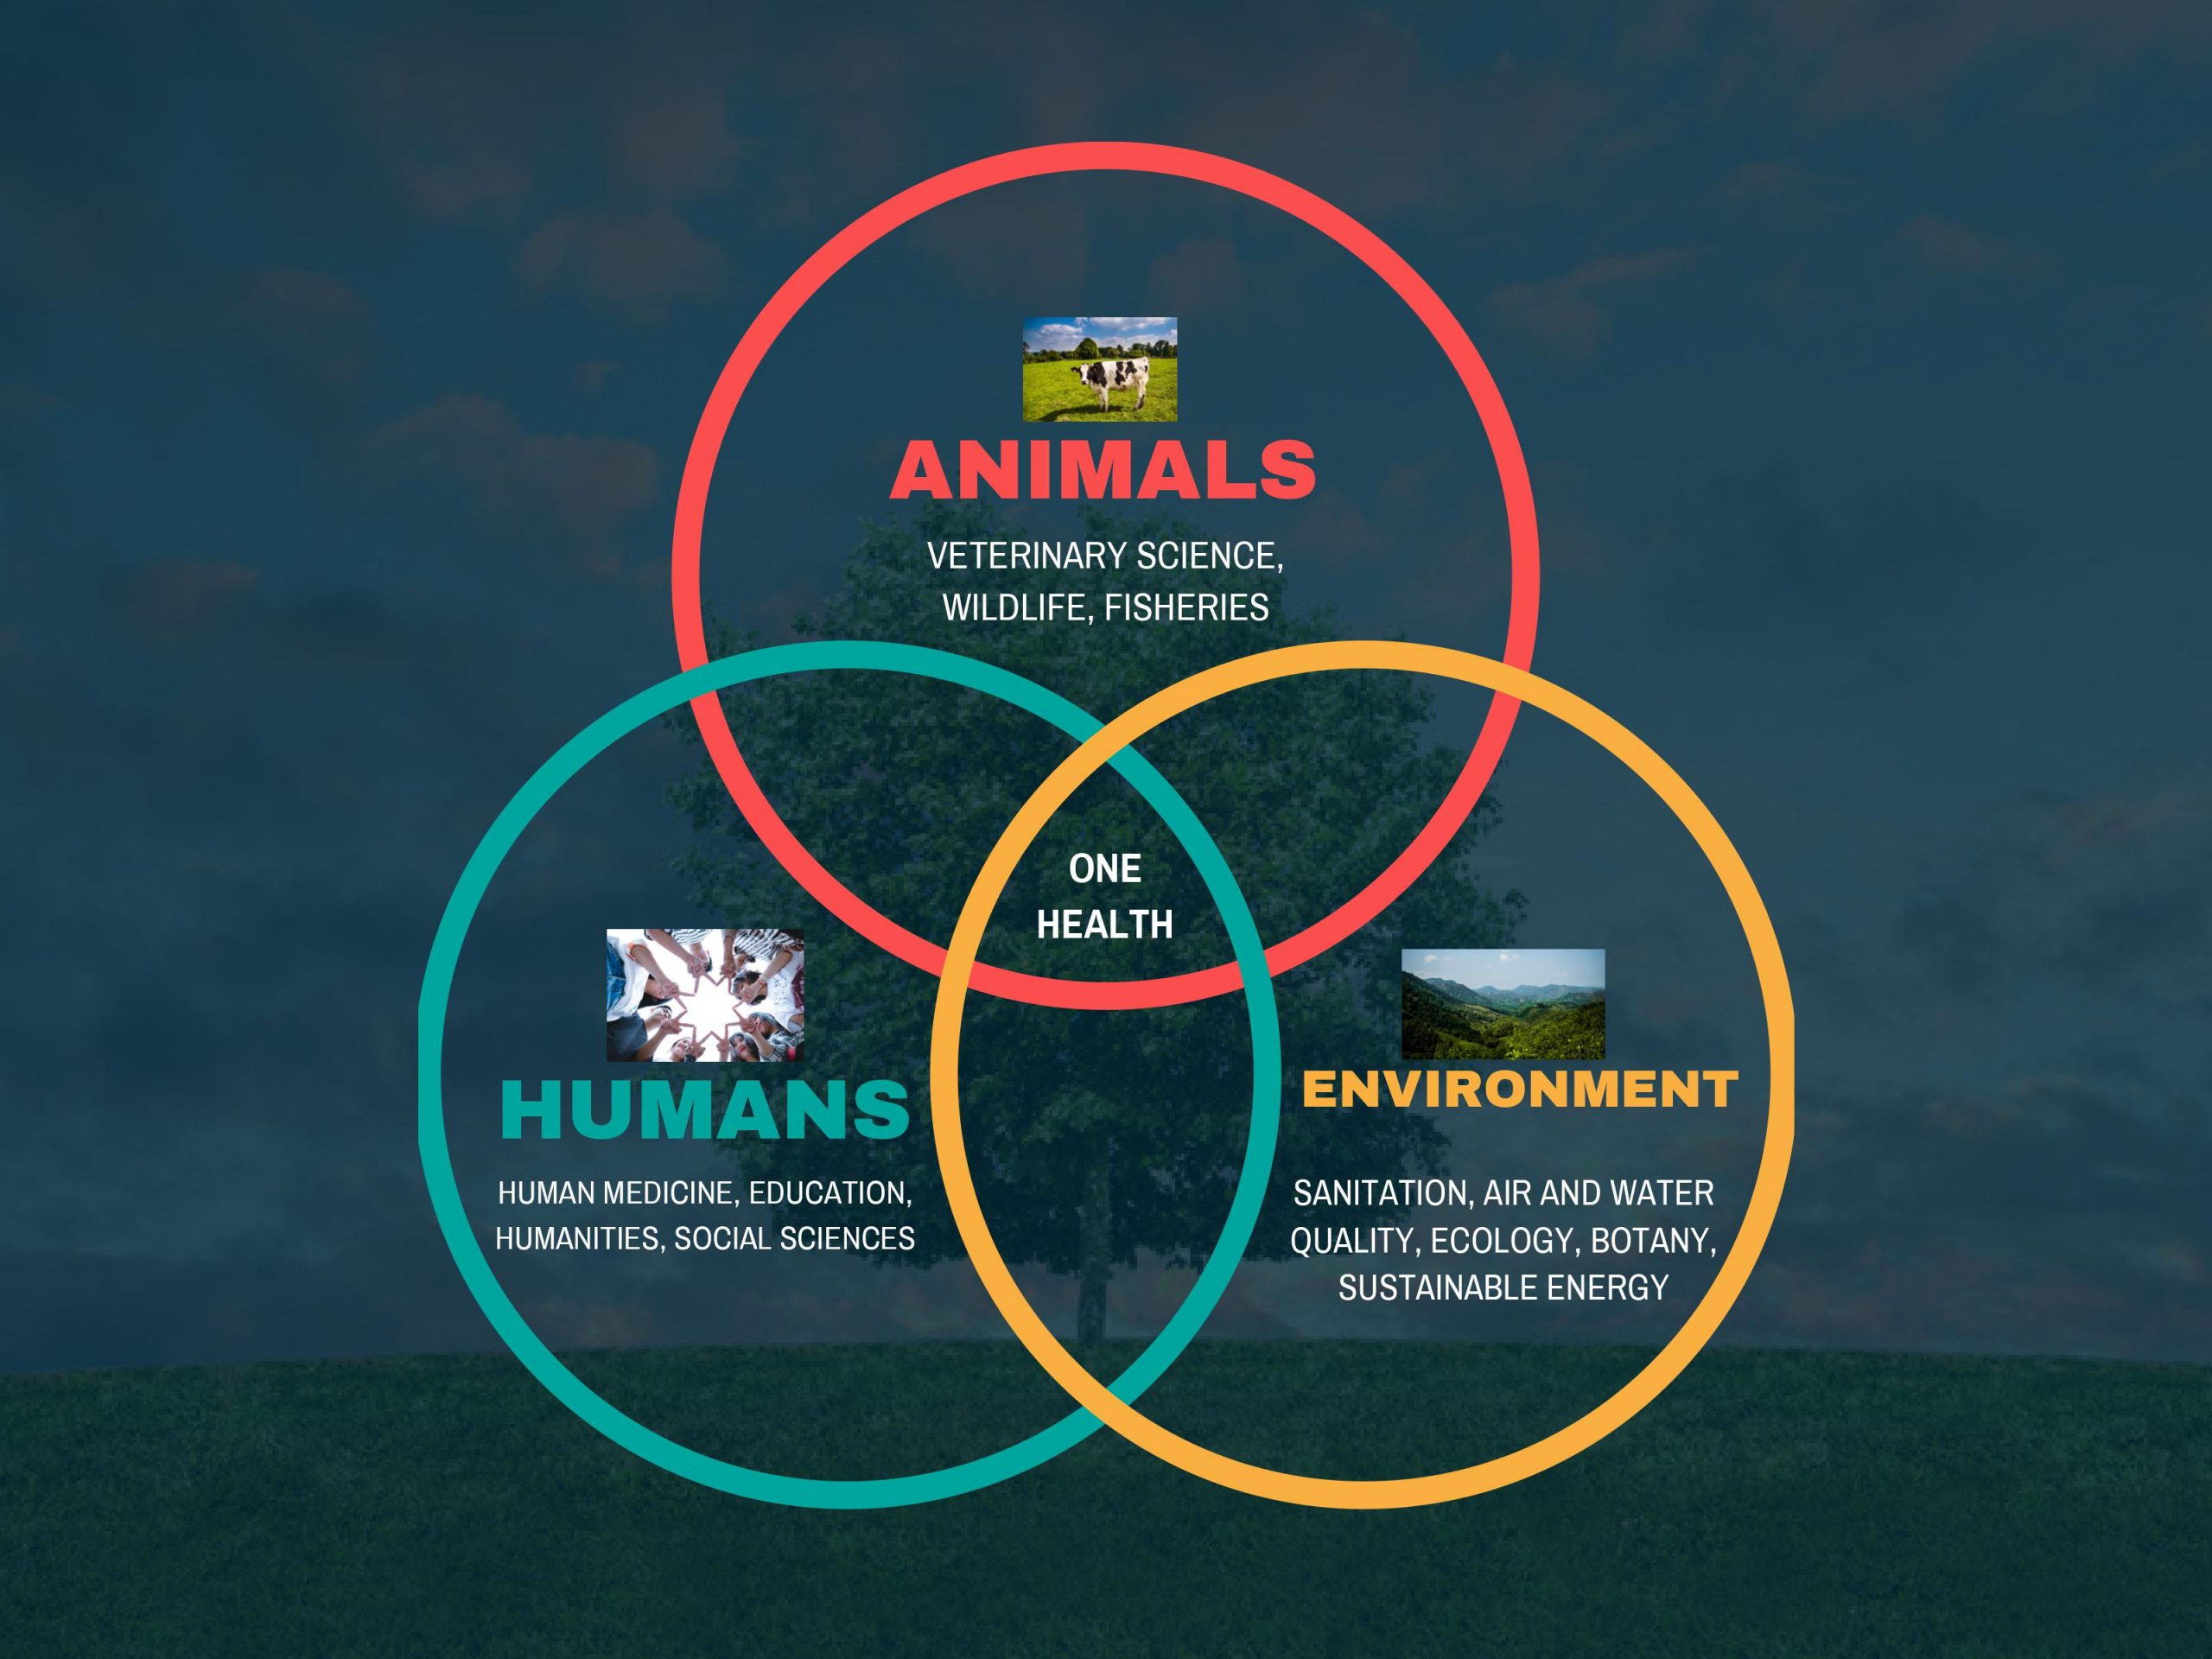 On Health includes animals (veterinary science, wildlife, fisheries), the environment (sanitation, air and water quality, ecology, botany, sustainable energy), and humans (human medicine, education, humanities, social sciences). 